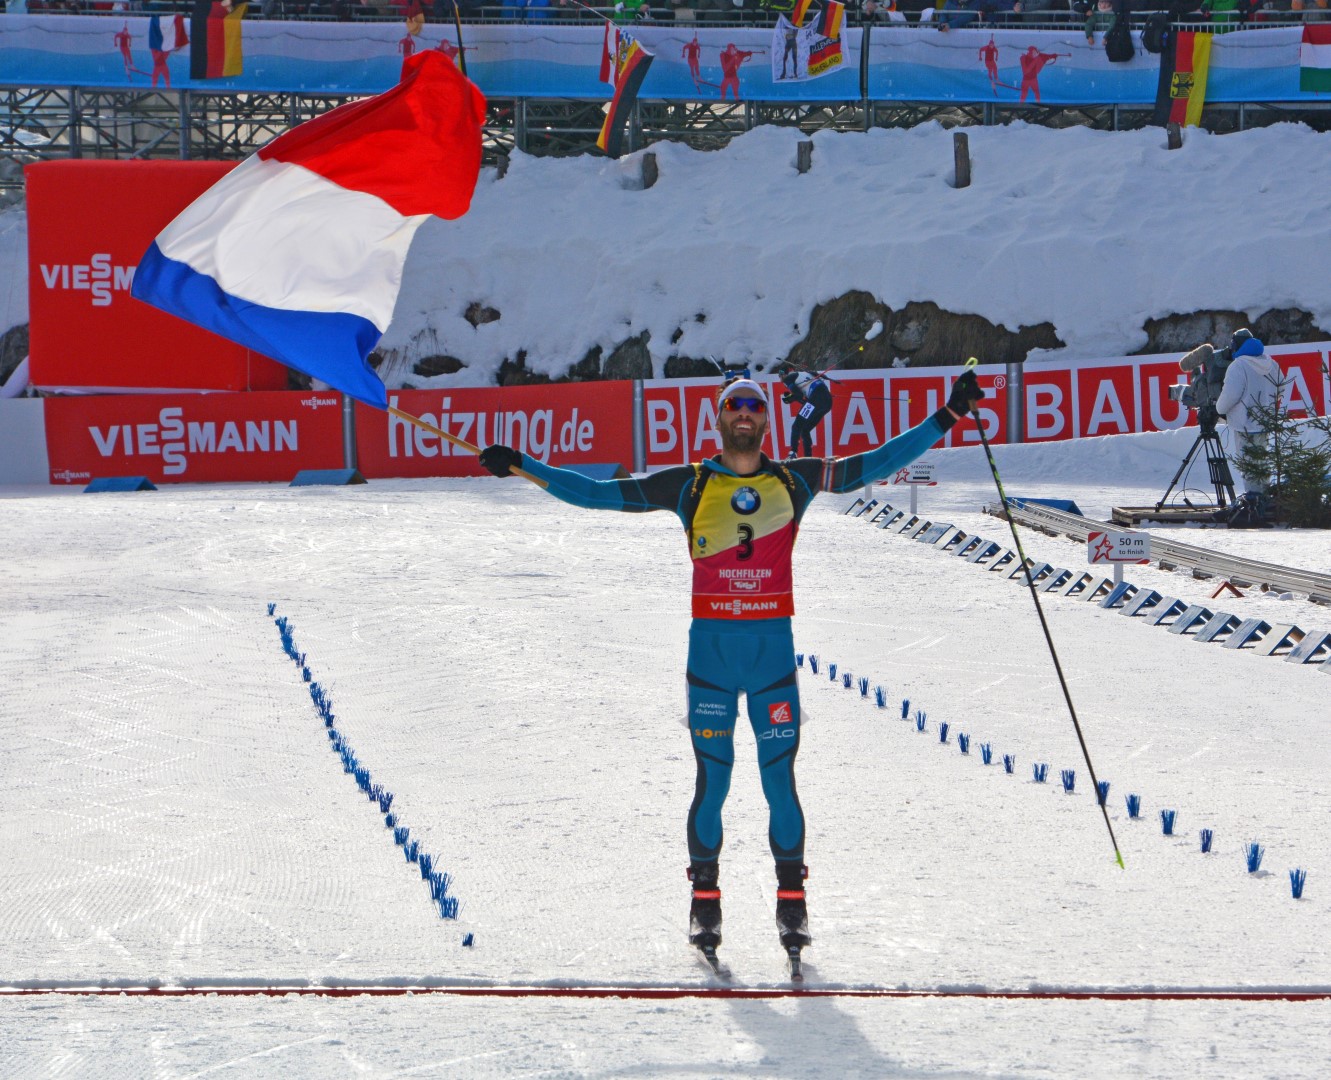 Sixth Place for Bailey in Pursuit, Gow 23rd; Fourcade Gets His Hochfilzen Gold